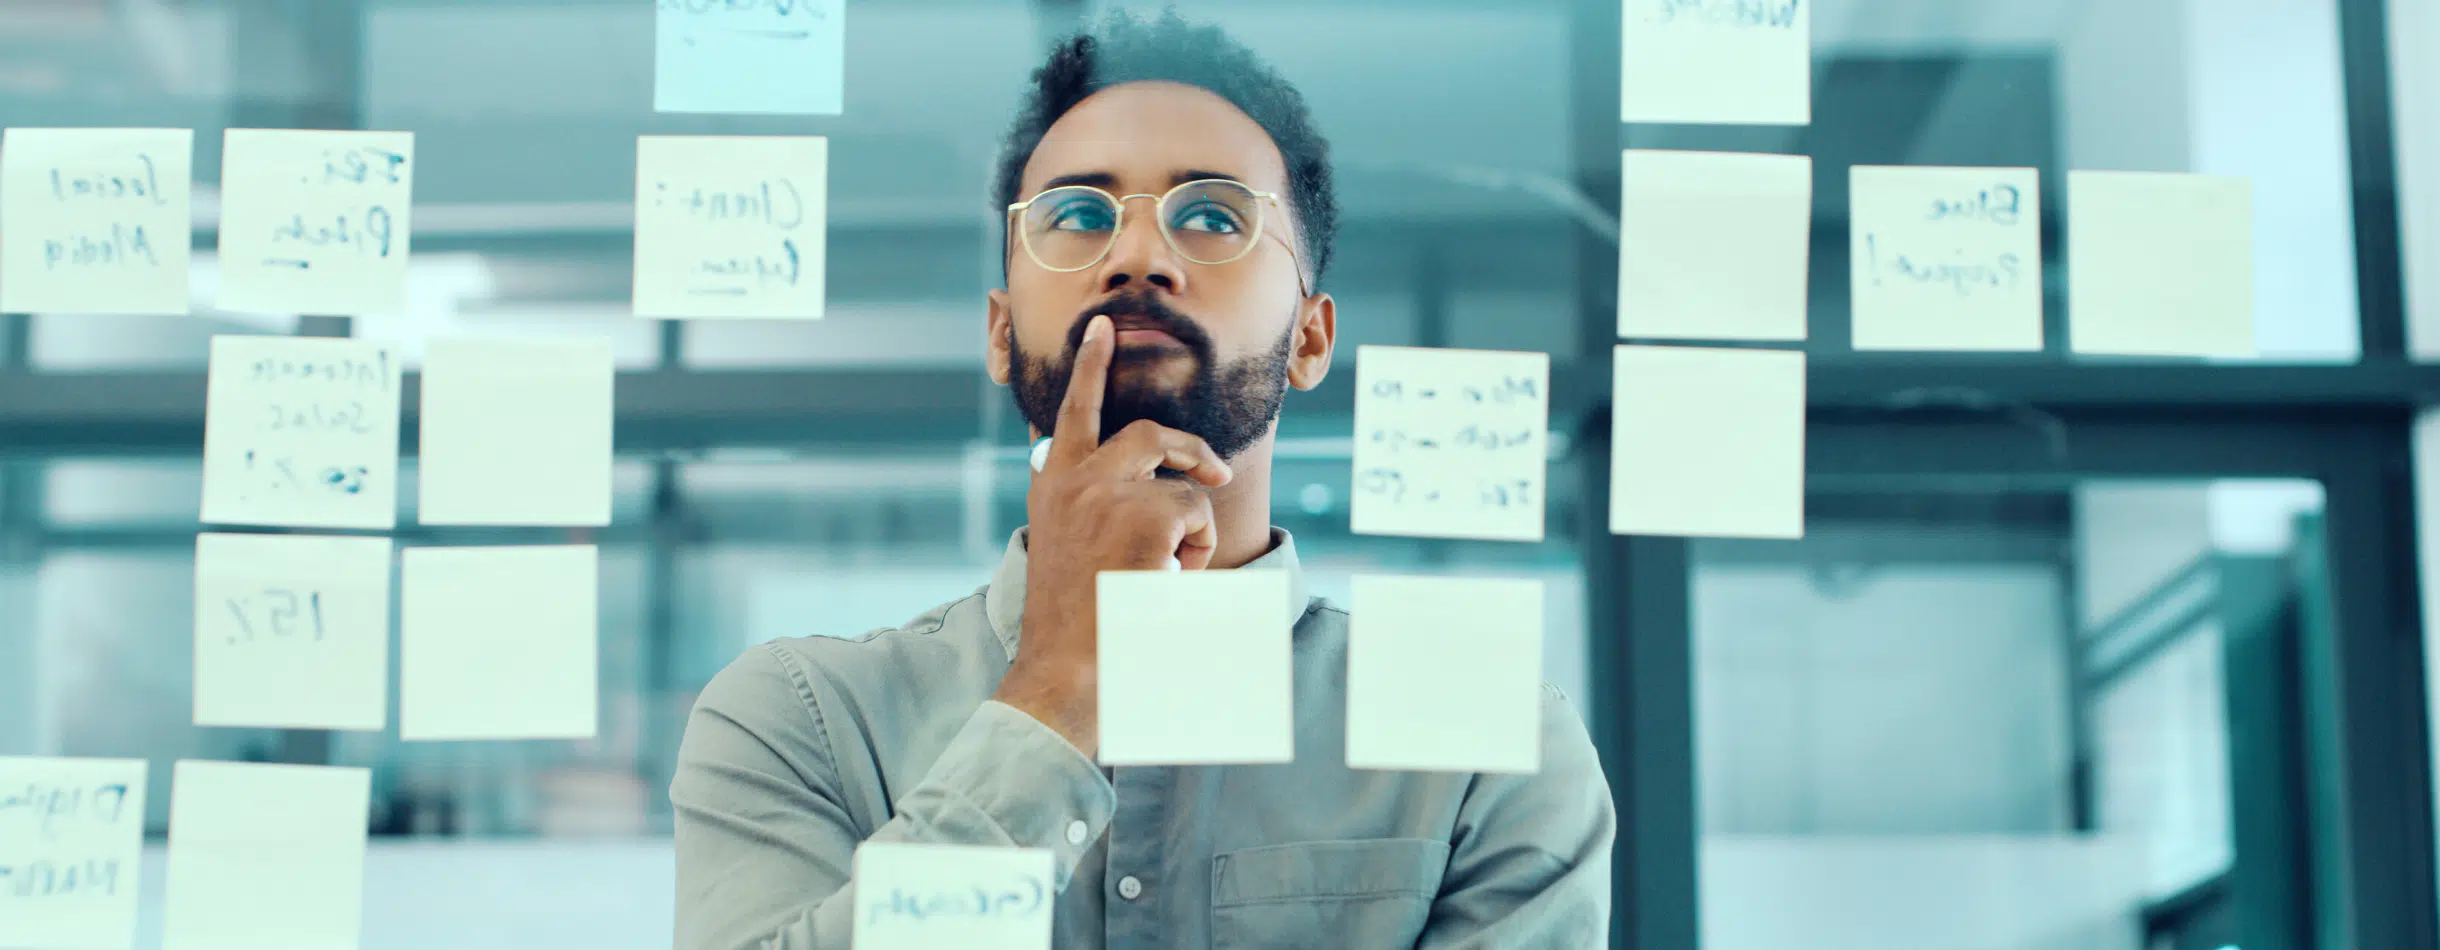 A man ponders at a wall of sticky notes. He rests his index finger on his upper lip as he brainstorms.